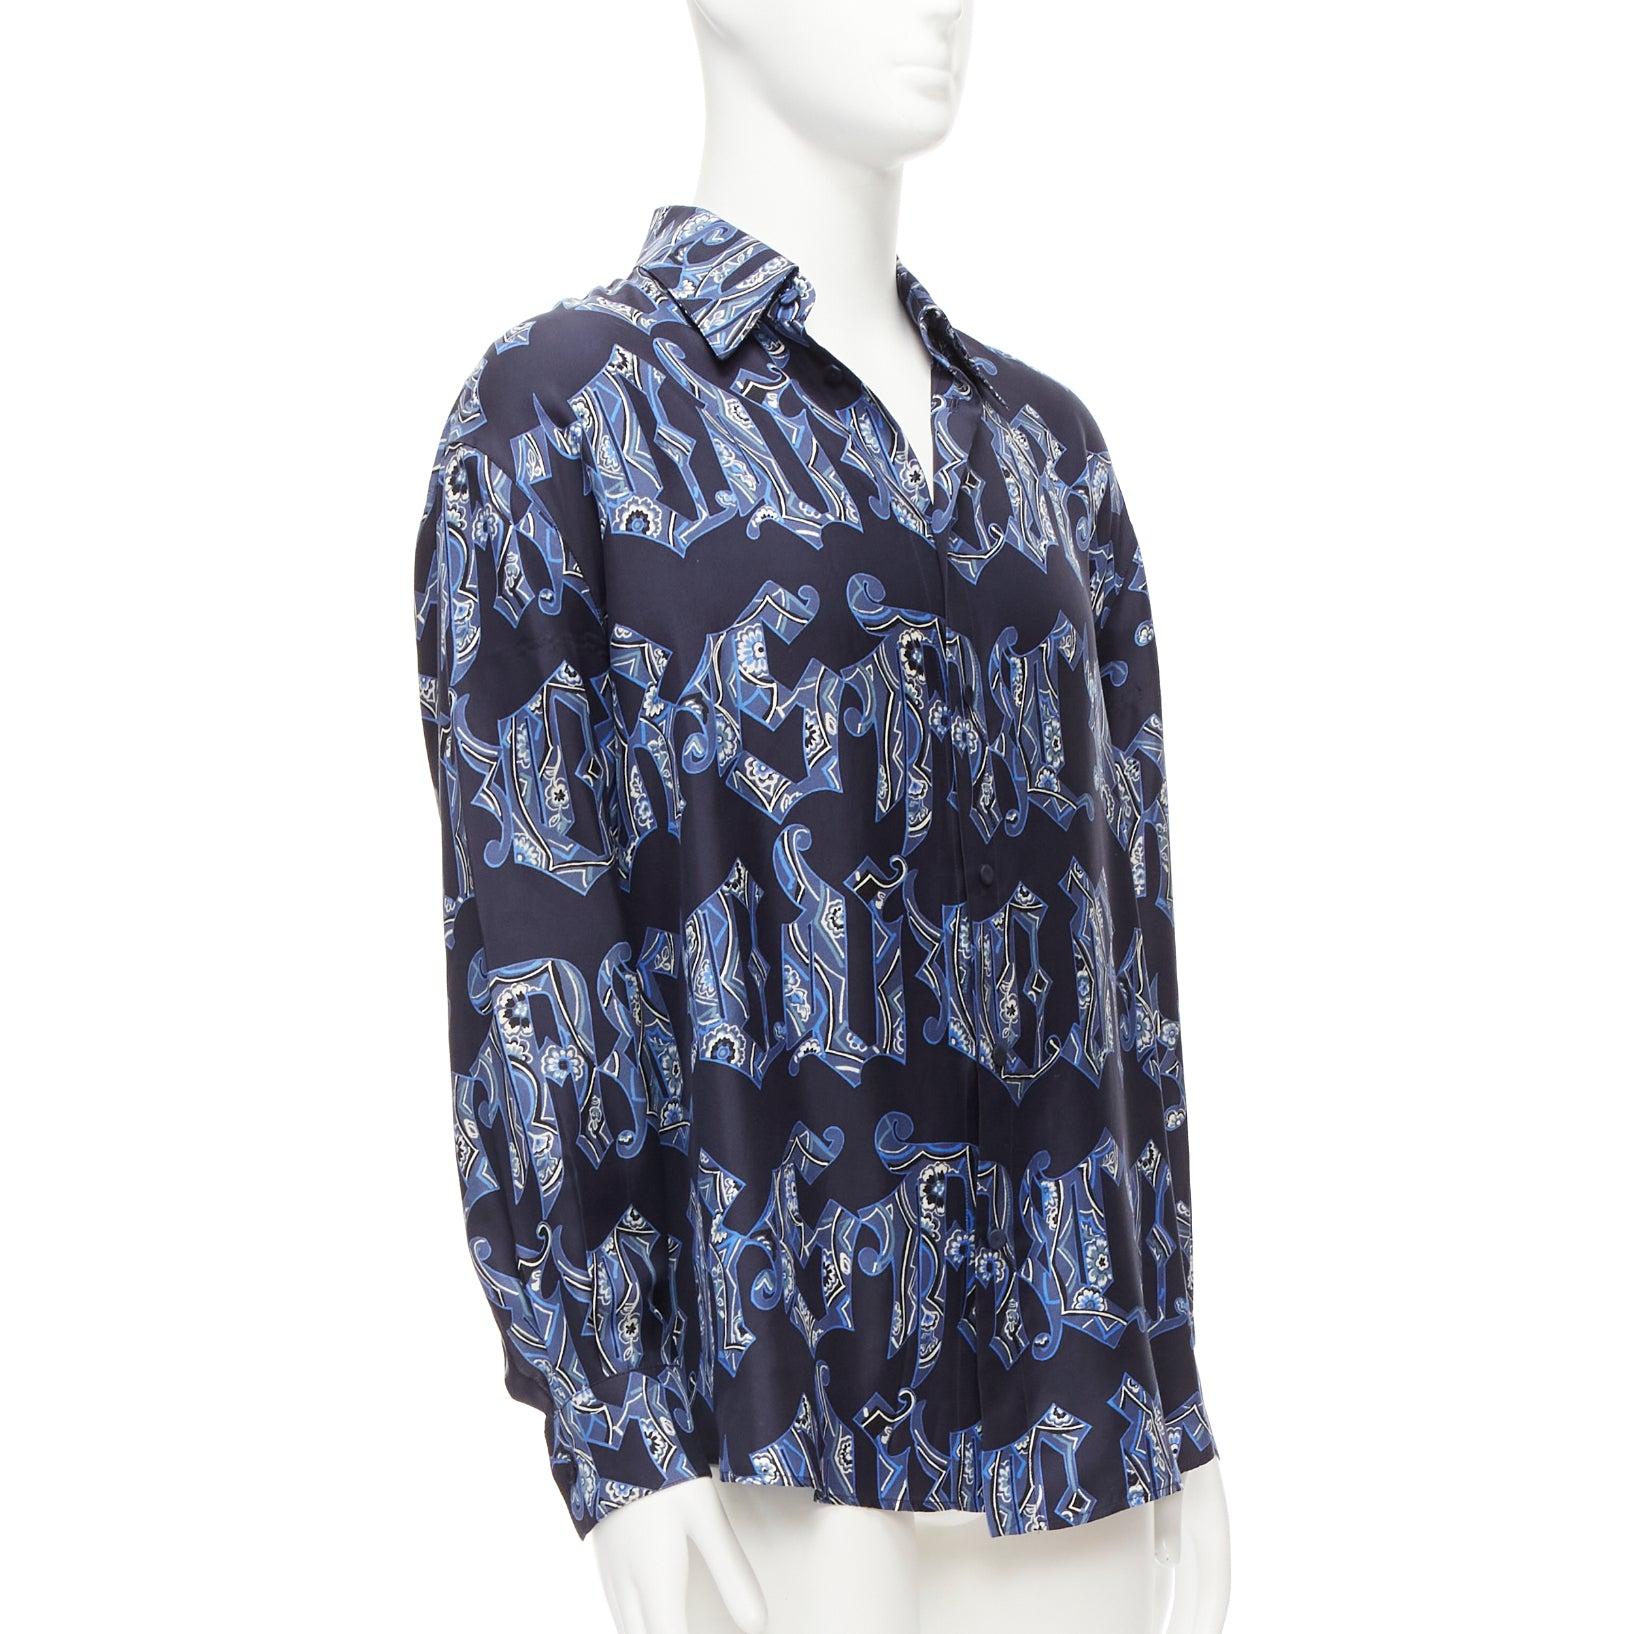 rare GIANNI VERSACE Vintage navy blue gothic font logo graphic shirt IT52 XL
Reference: TGAS/D00890
Brand: Gianni Versace
Designer: Gianni Versace
Material: Feels like silk
Color: Blue, Navy
Pattern: Floral
Closure: Button

CONDITION:
Condition: